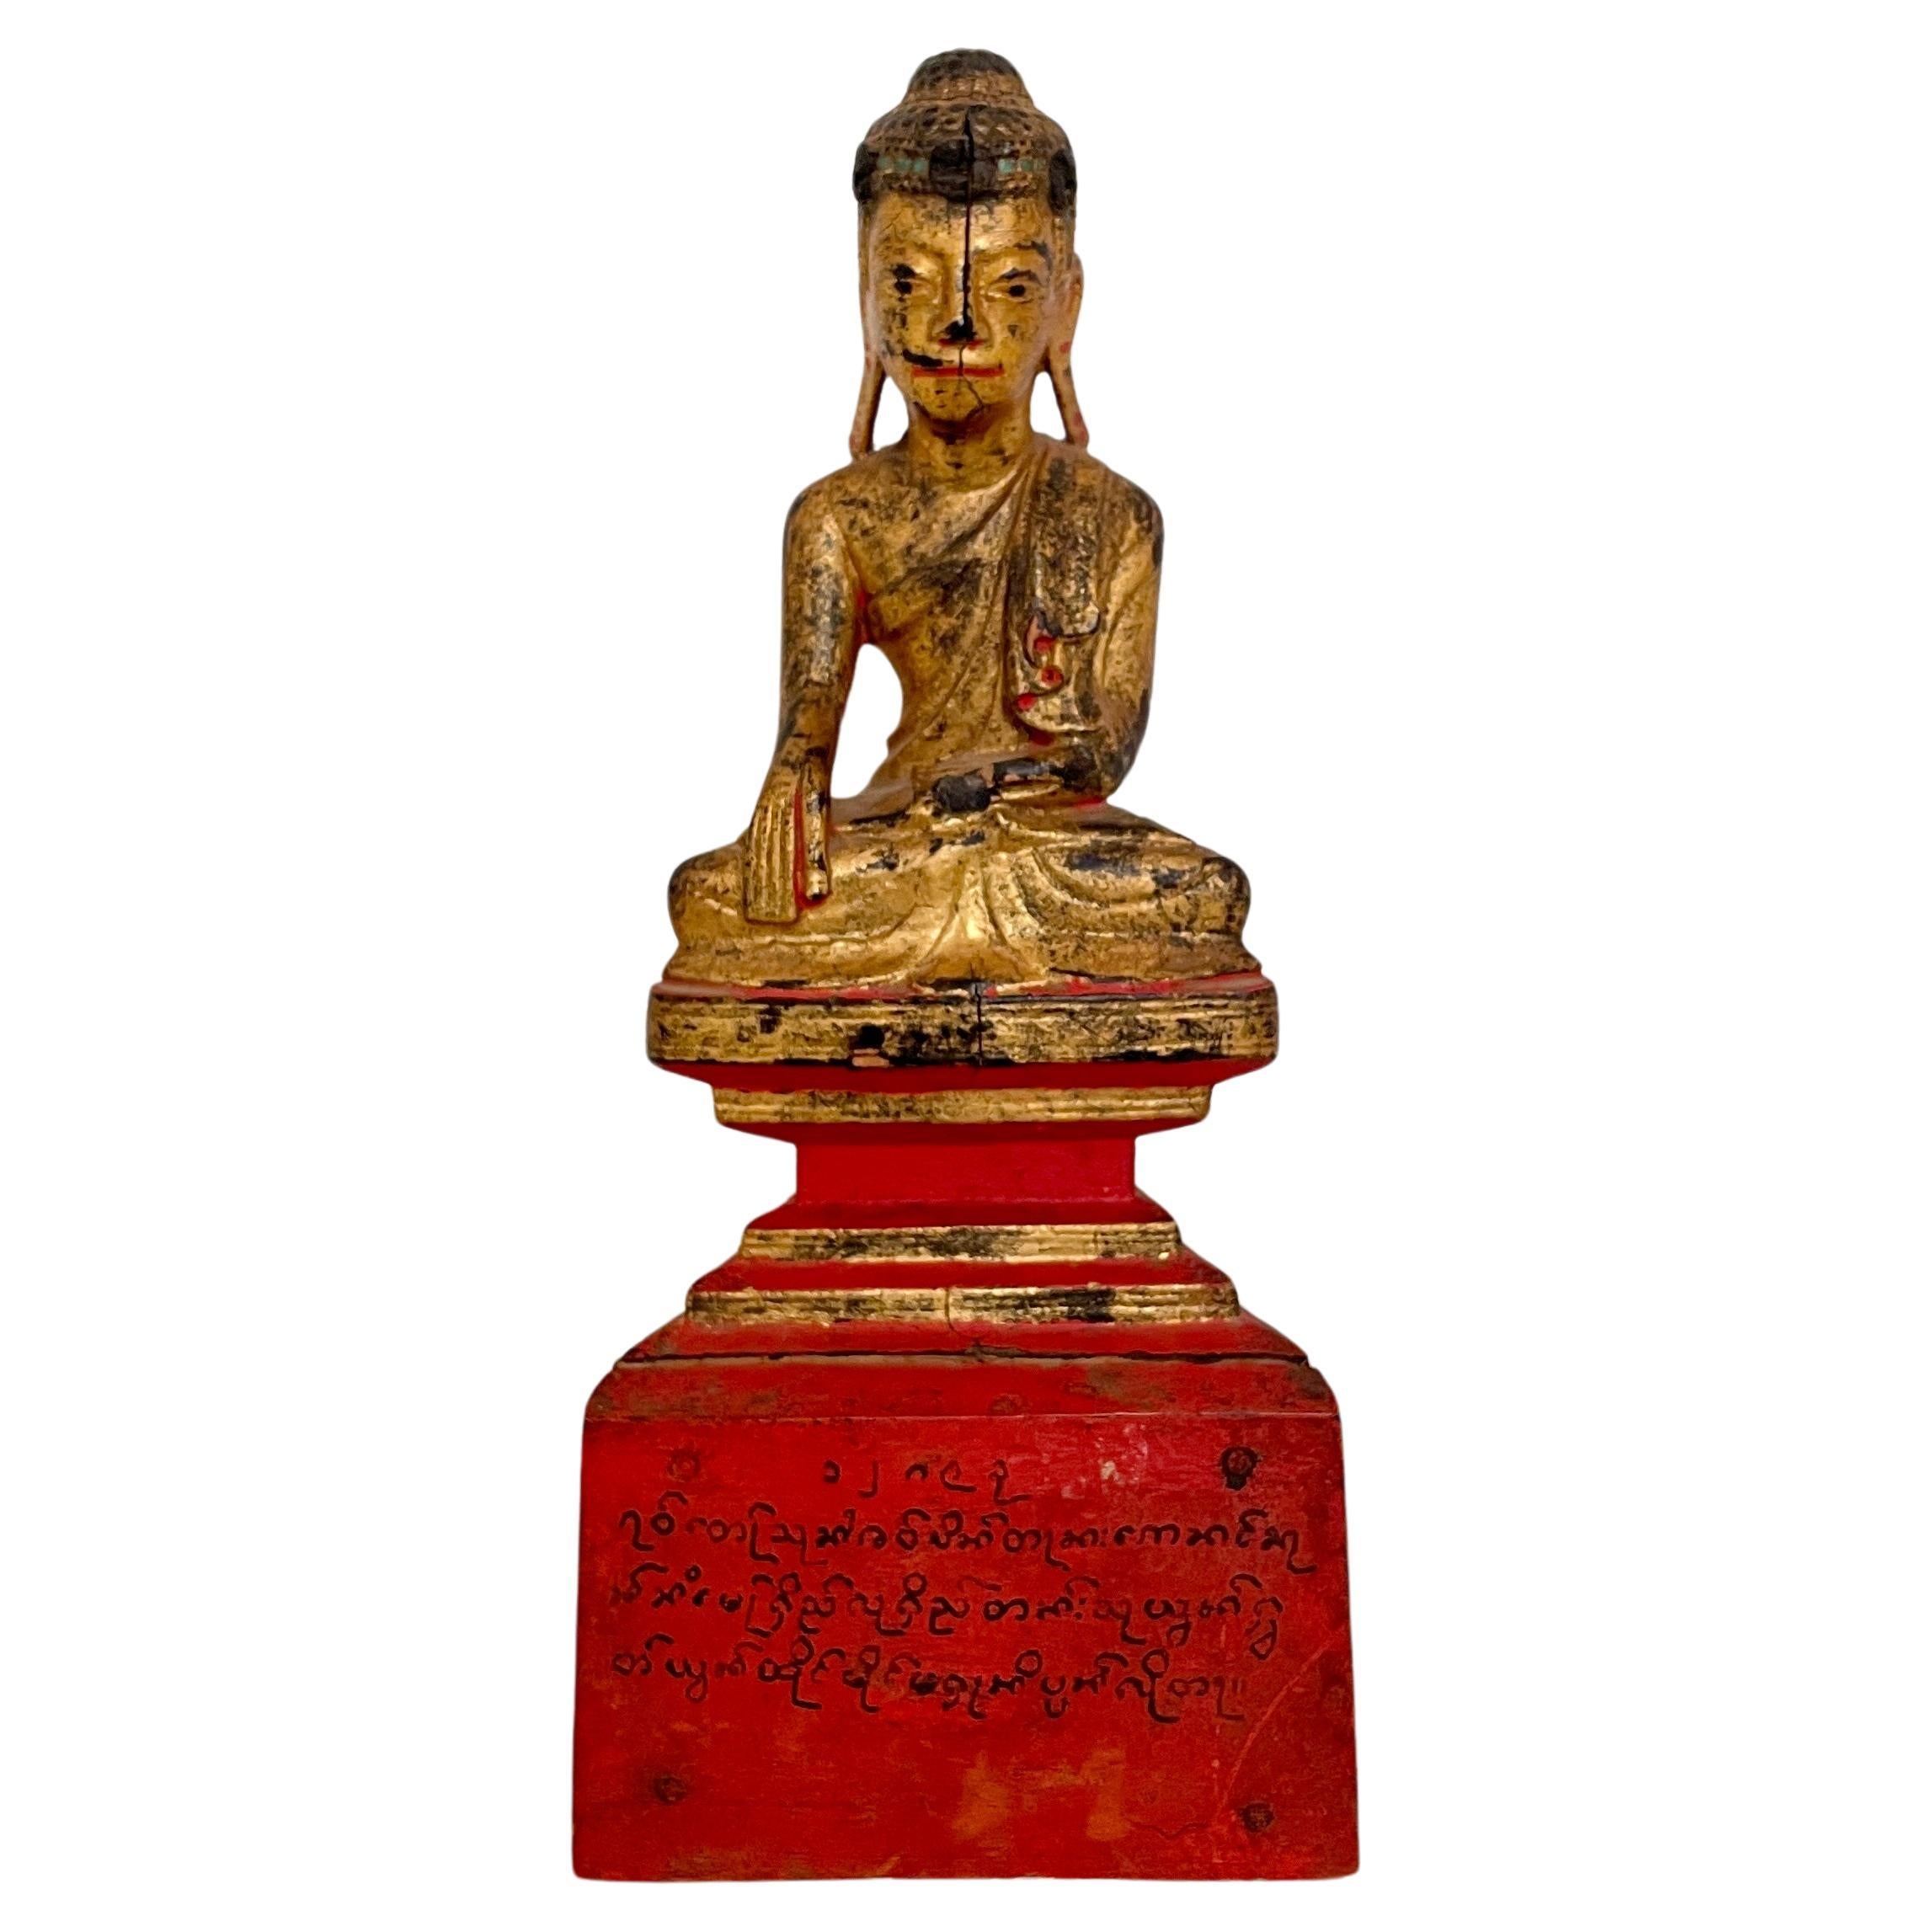 19th Cenury Burmese Seated Mandalay Buddha in gilded Wood and Lacquer, ca. 1890 For Sale